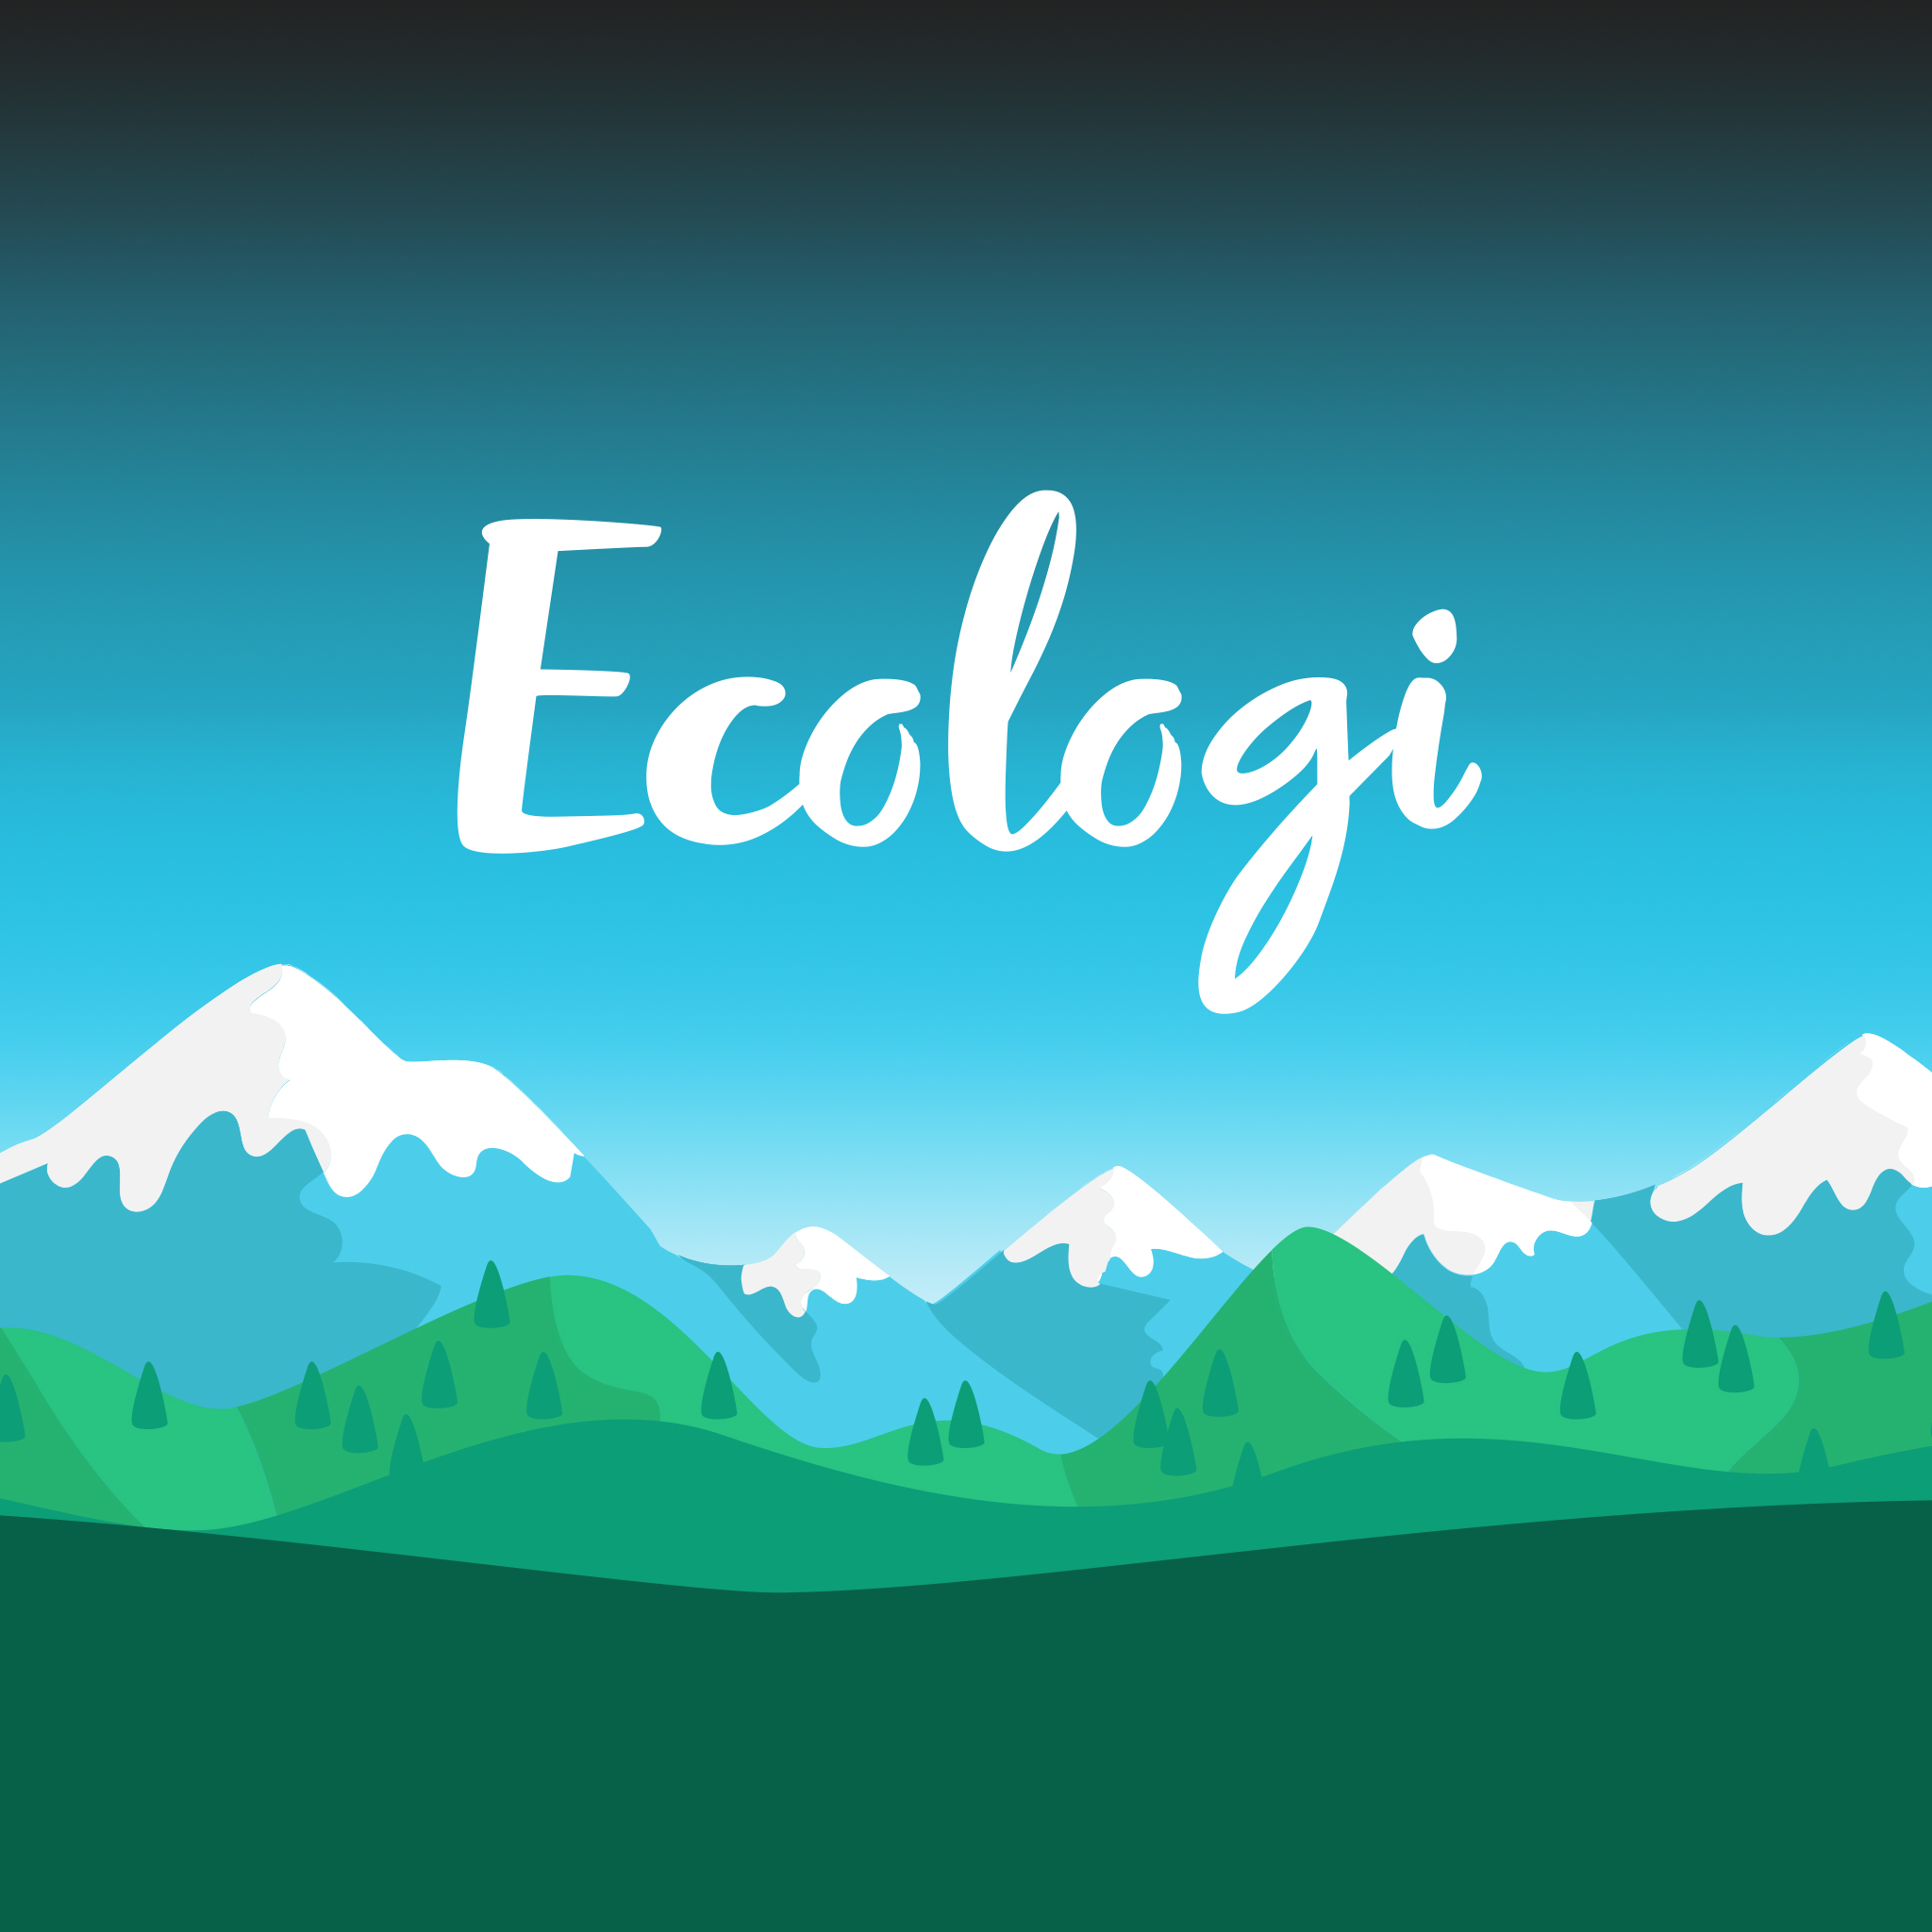 Spring Journal: Catching up with Ecologi!